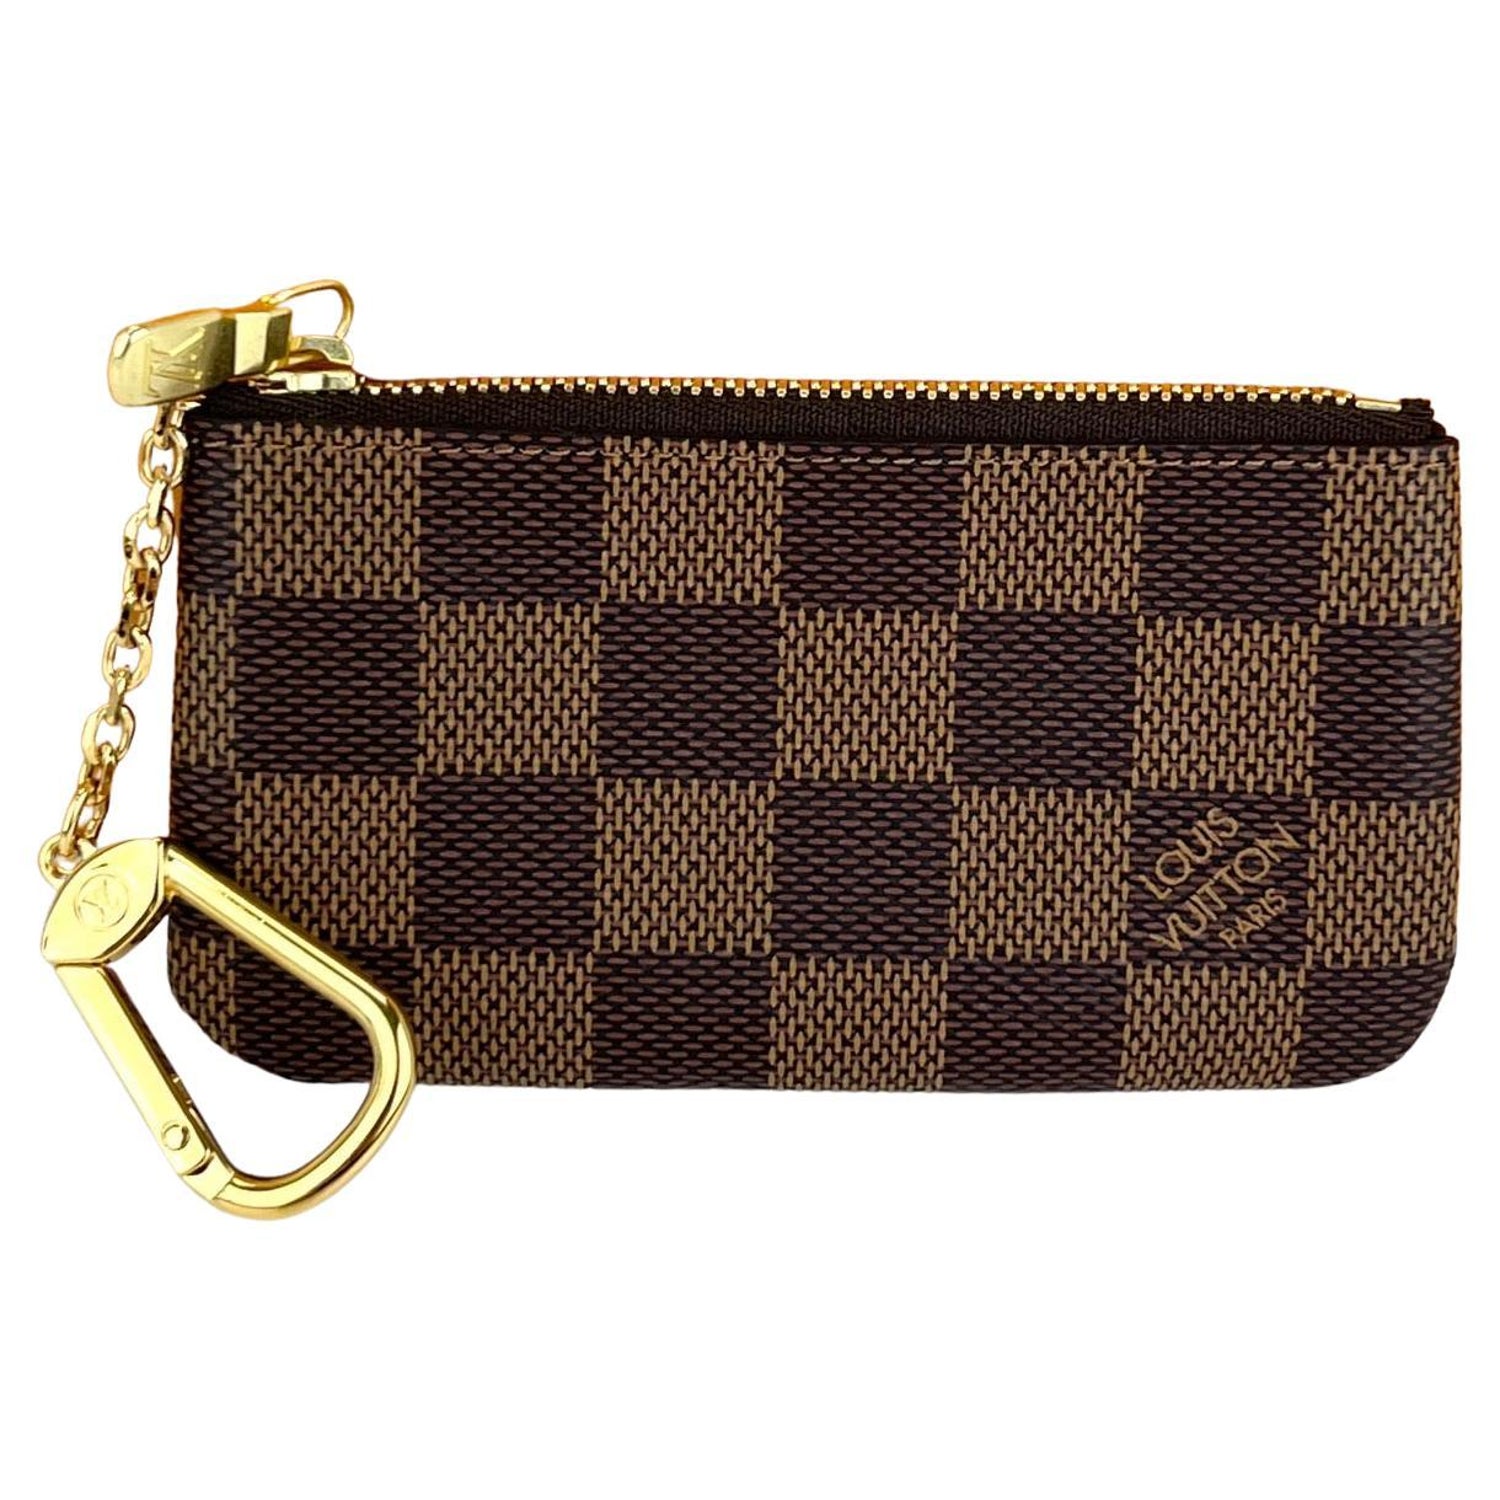 Authentic BRAND NEW with box Louis Vuitton Key Cles Coin Pouch Damier Ebene